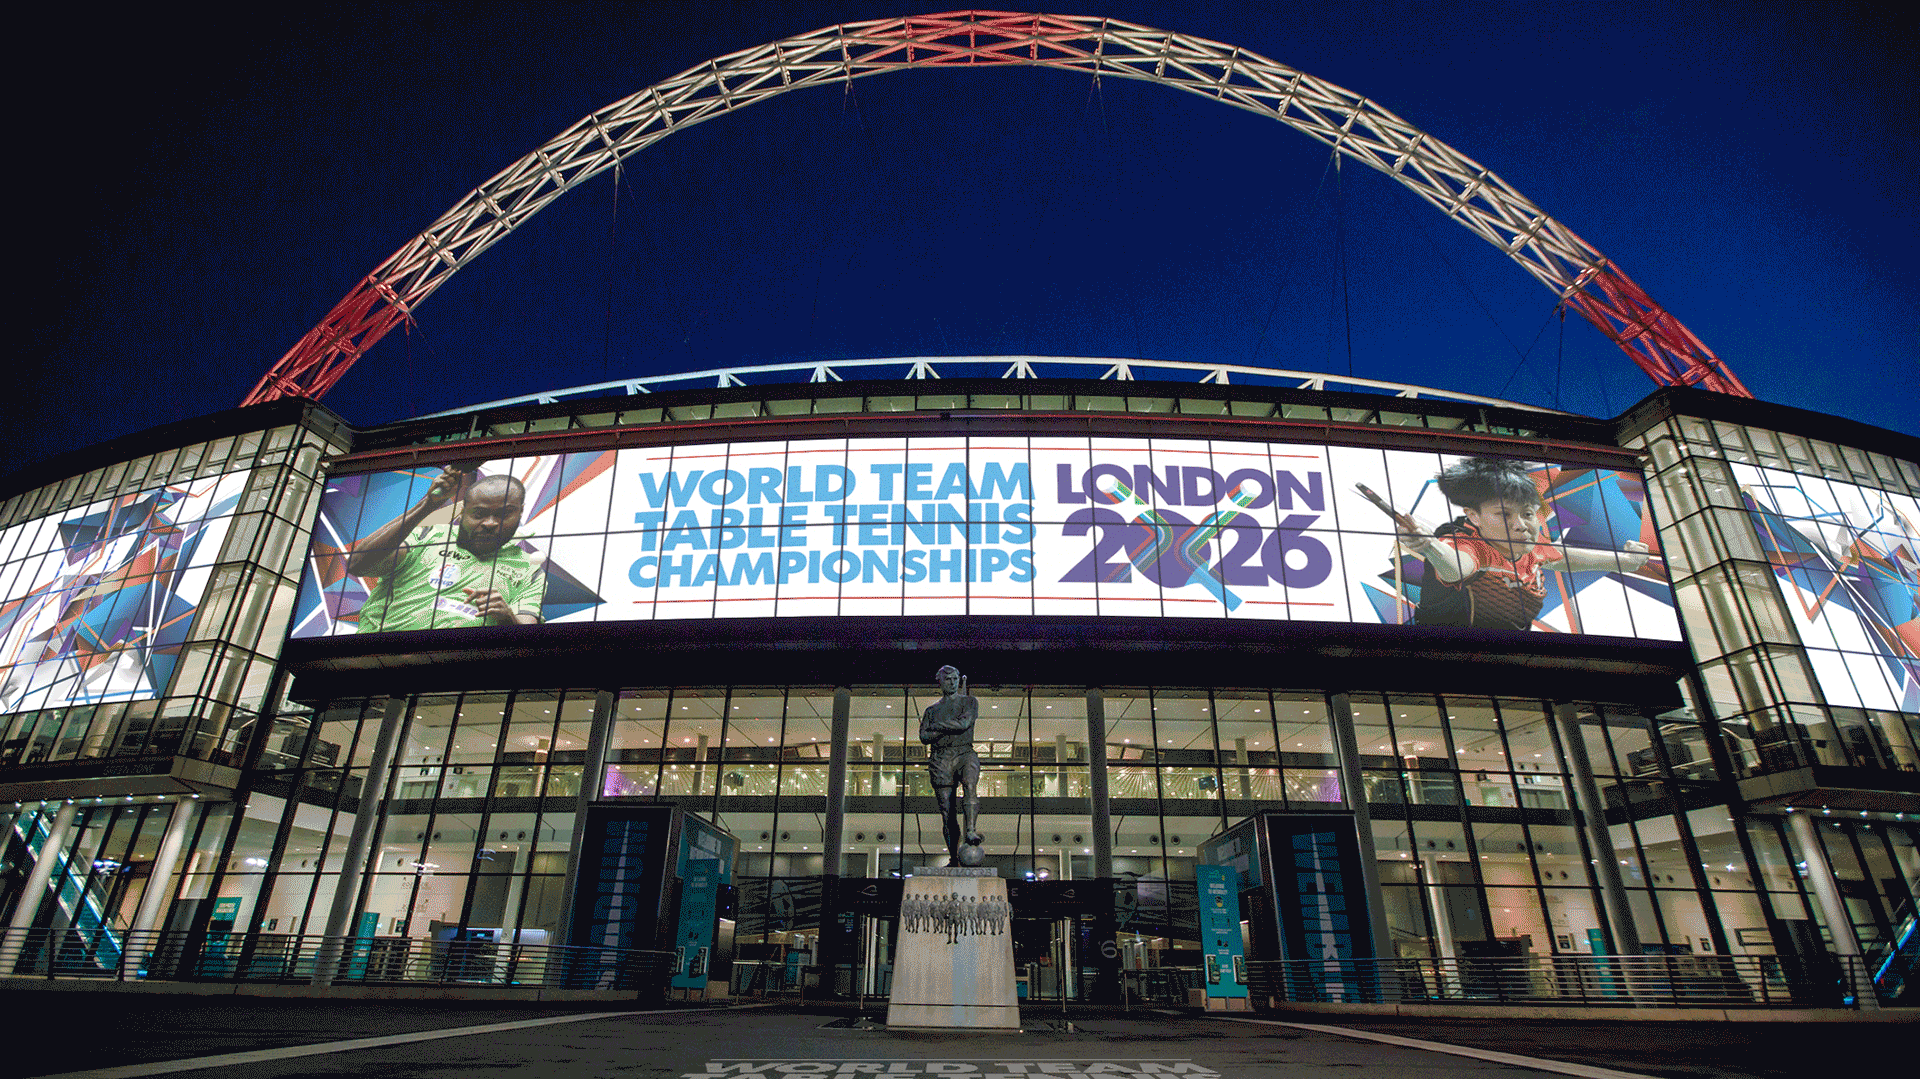 Two years to go: The road to Wembley 2026 starts now!